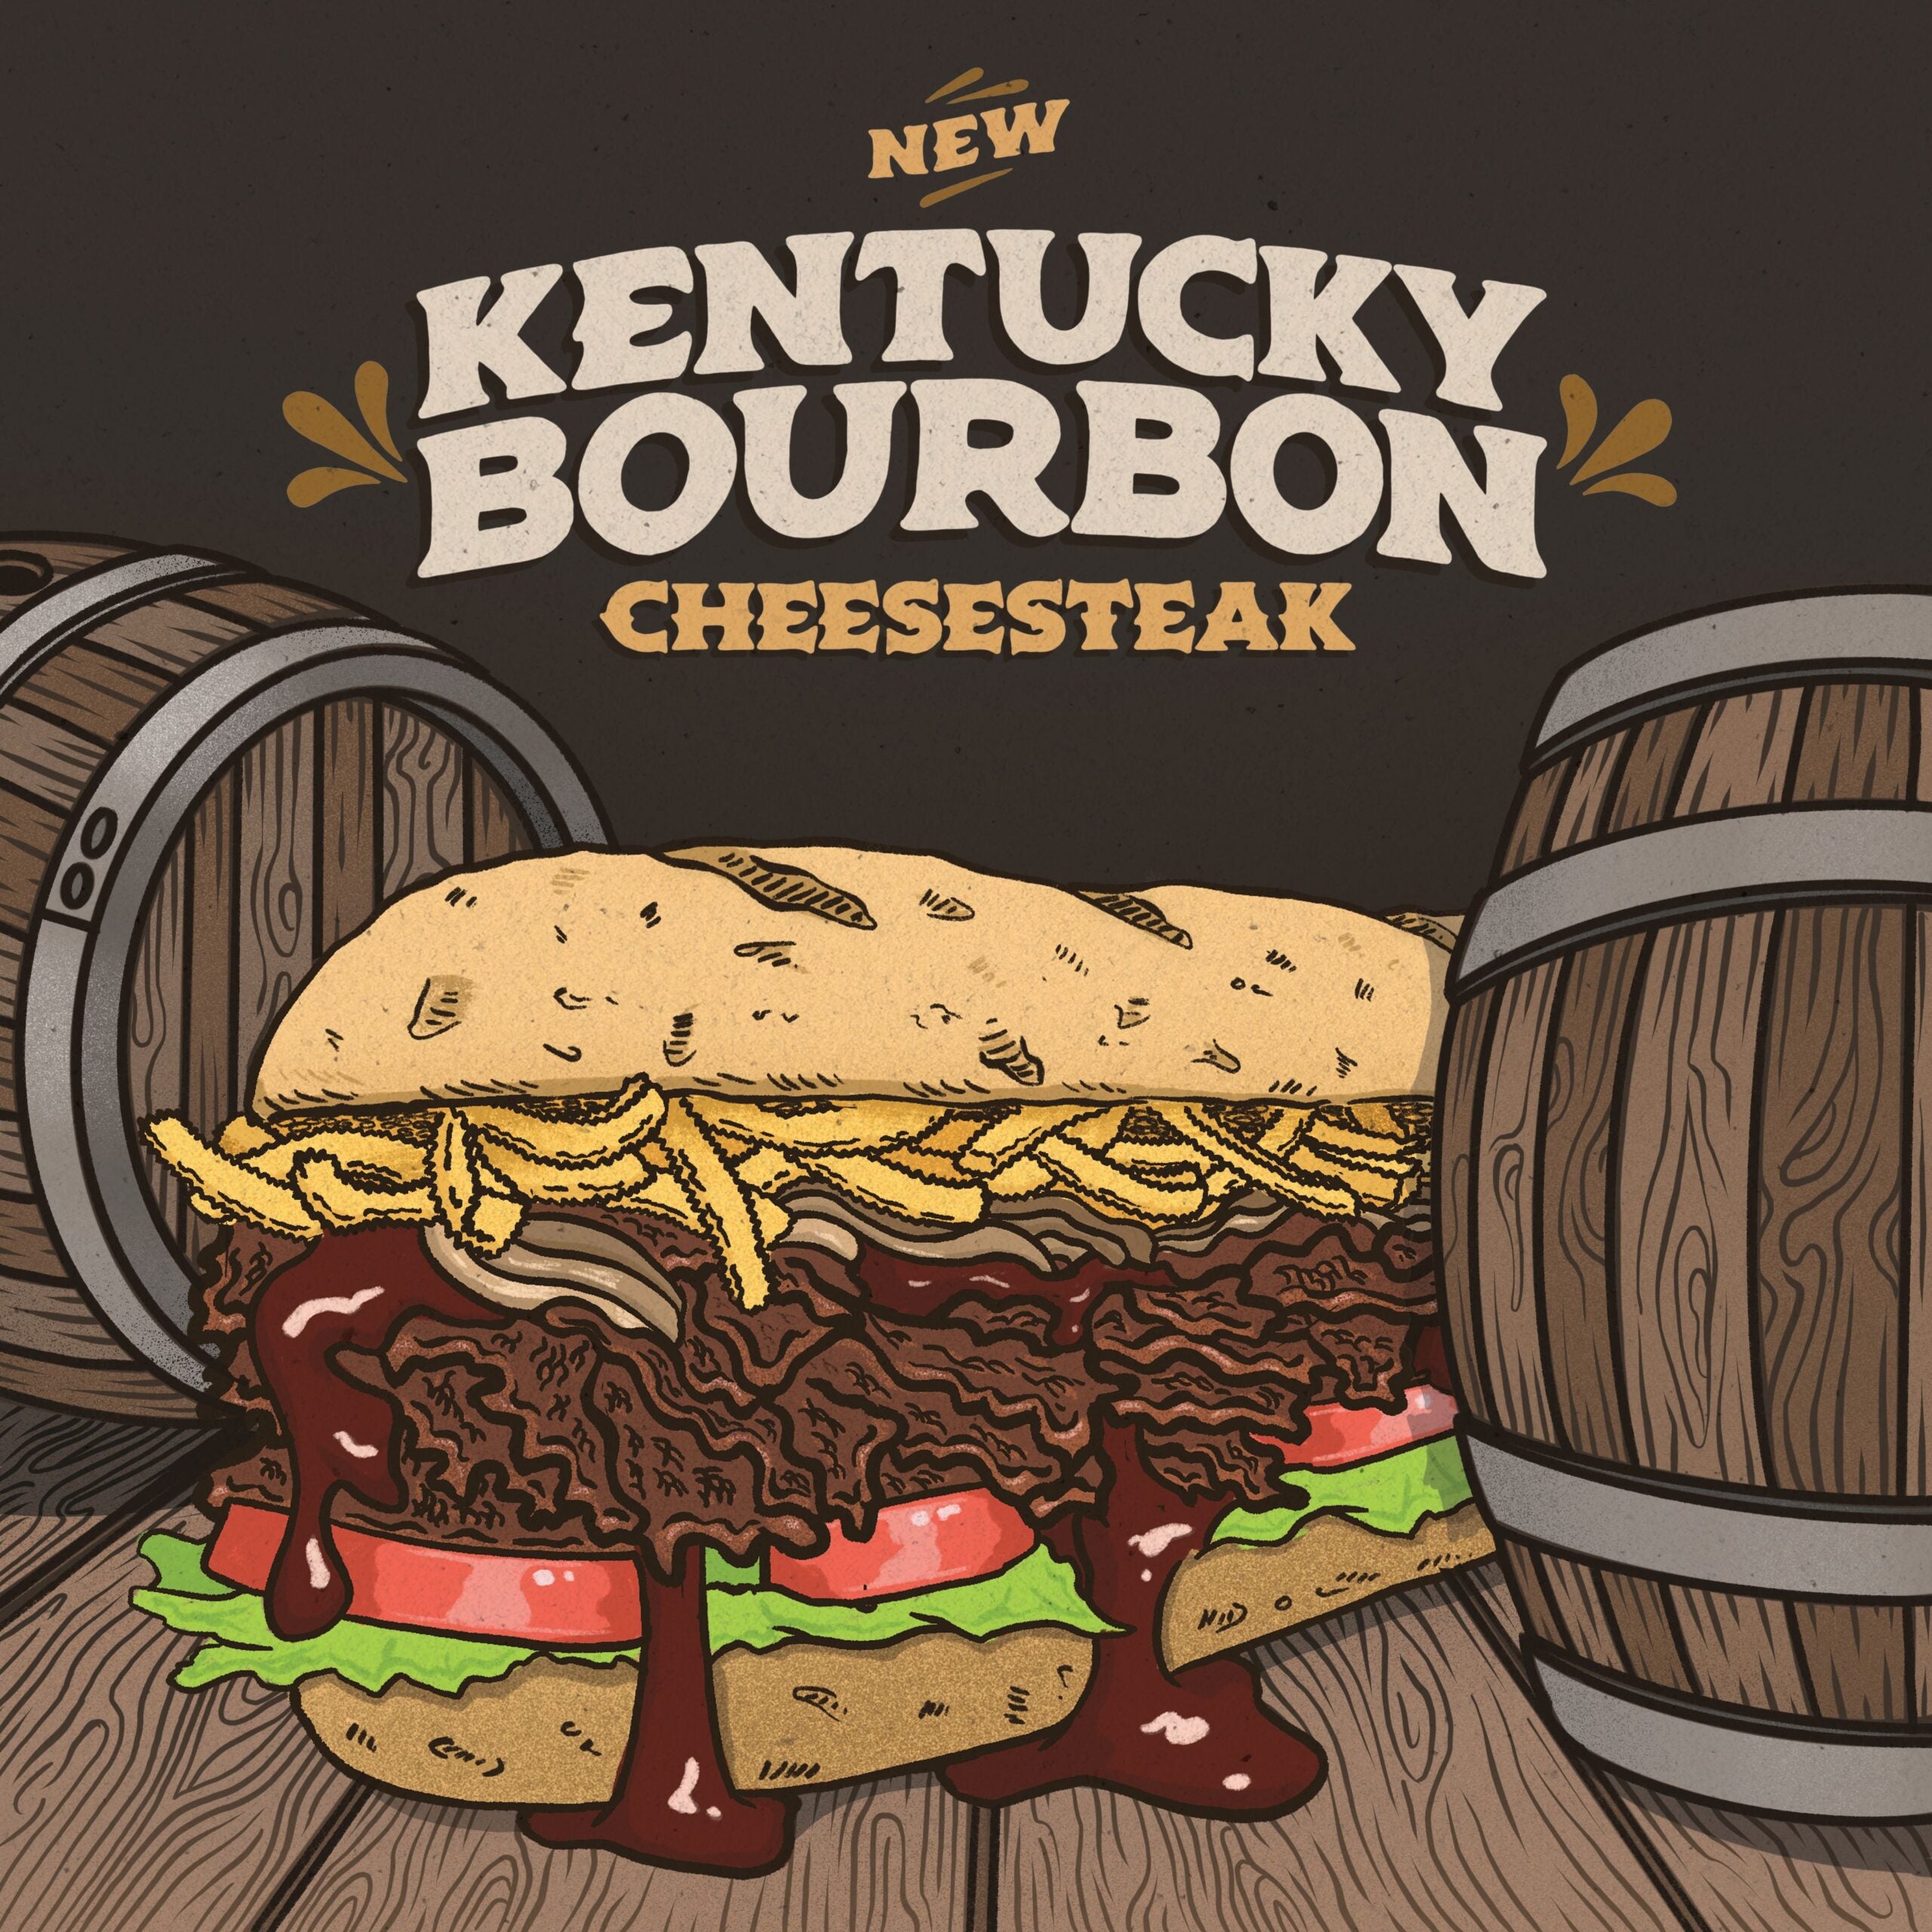 An illustrated Kentucky Bourbon Cheesesteak from Charleys Cheesesteaks on a wood table with oak casks. 